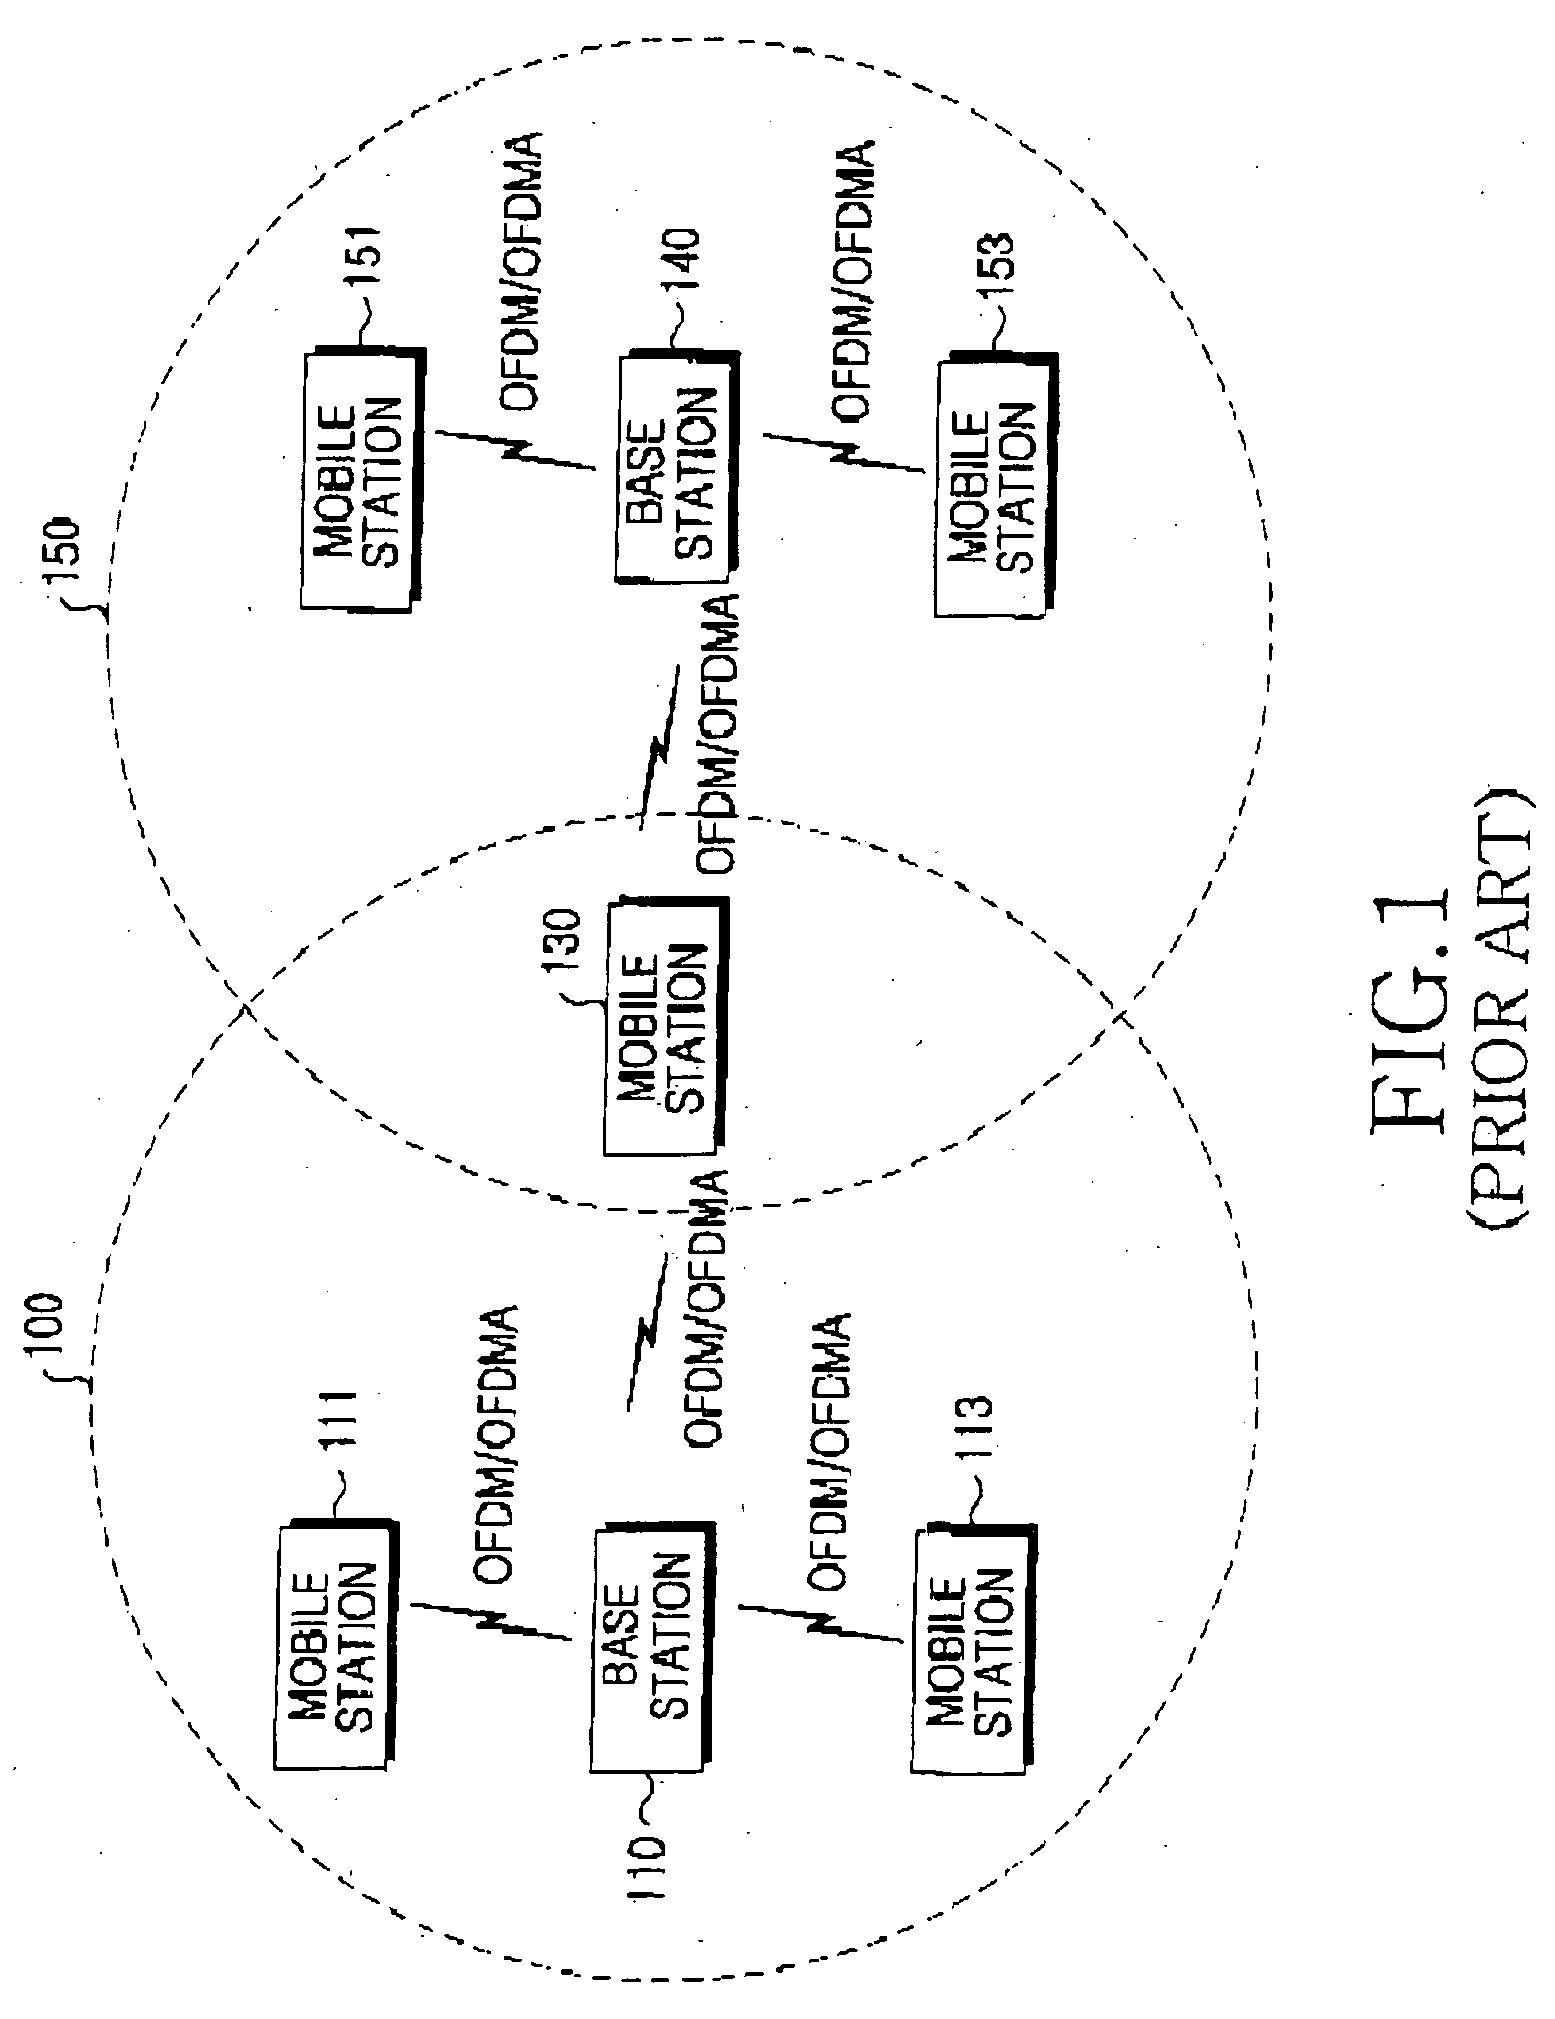 System and method for transmitting/receiving hybrid automatic repeat request buffer capability information in broadband wireless access communication system